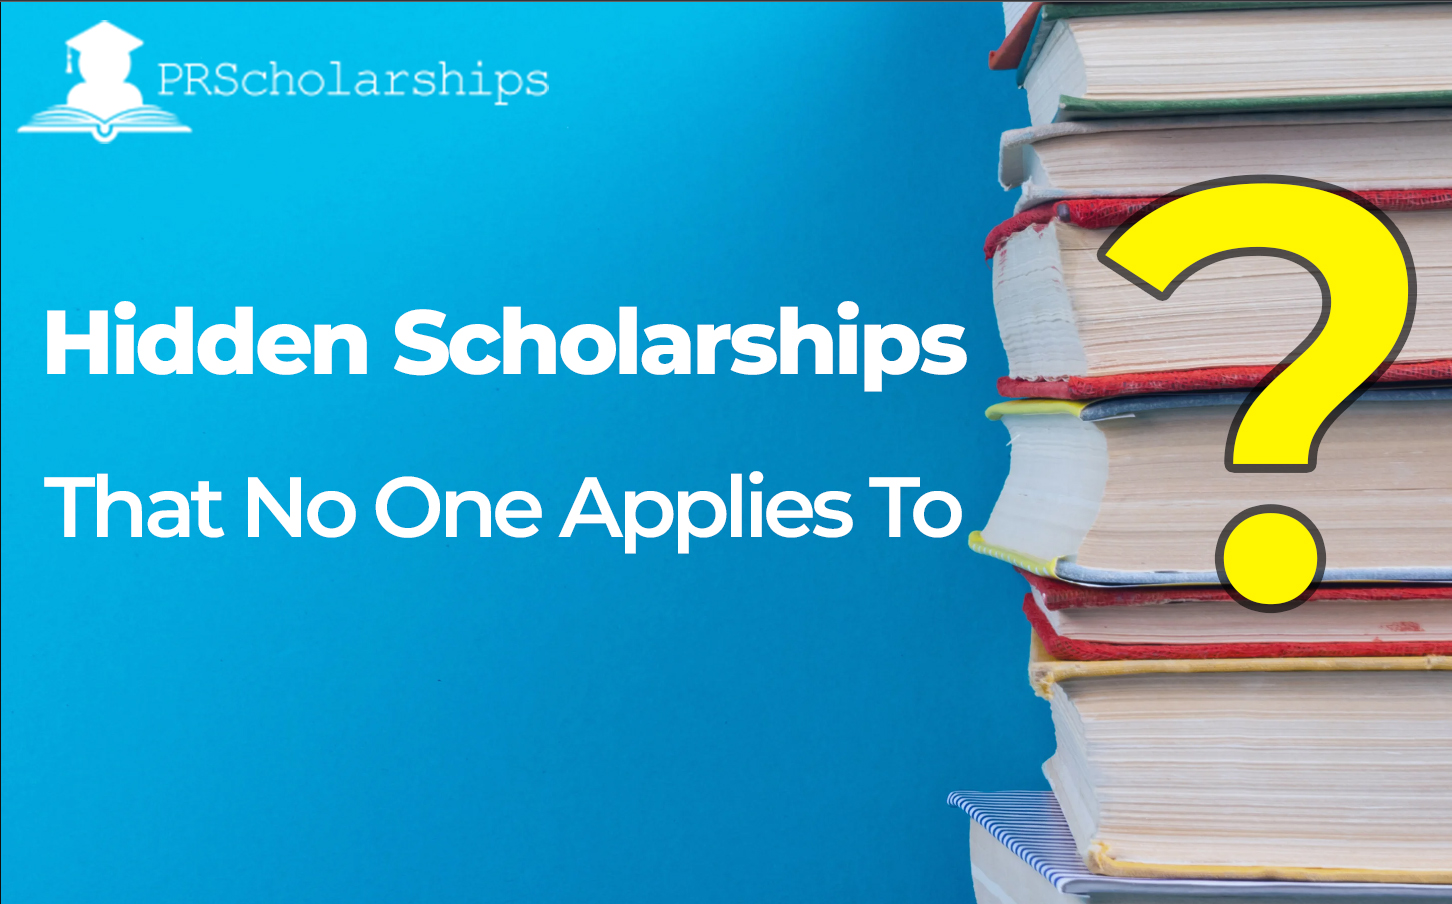 Hidden scholarships that no one applies to, image contains books with a question mark indicating hidden scholarships